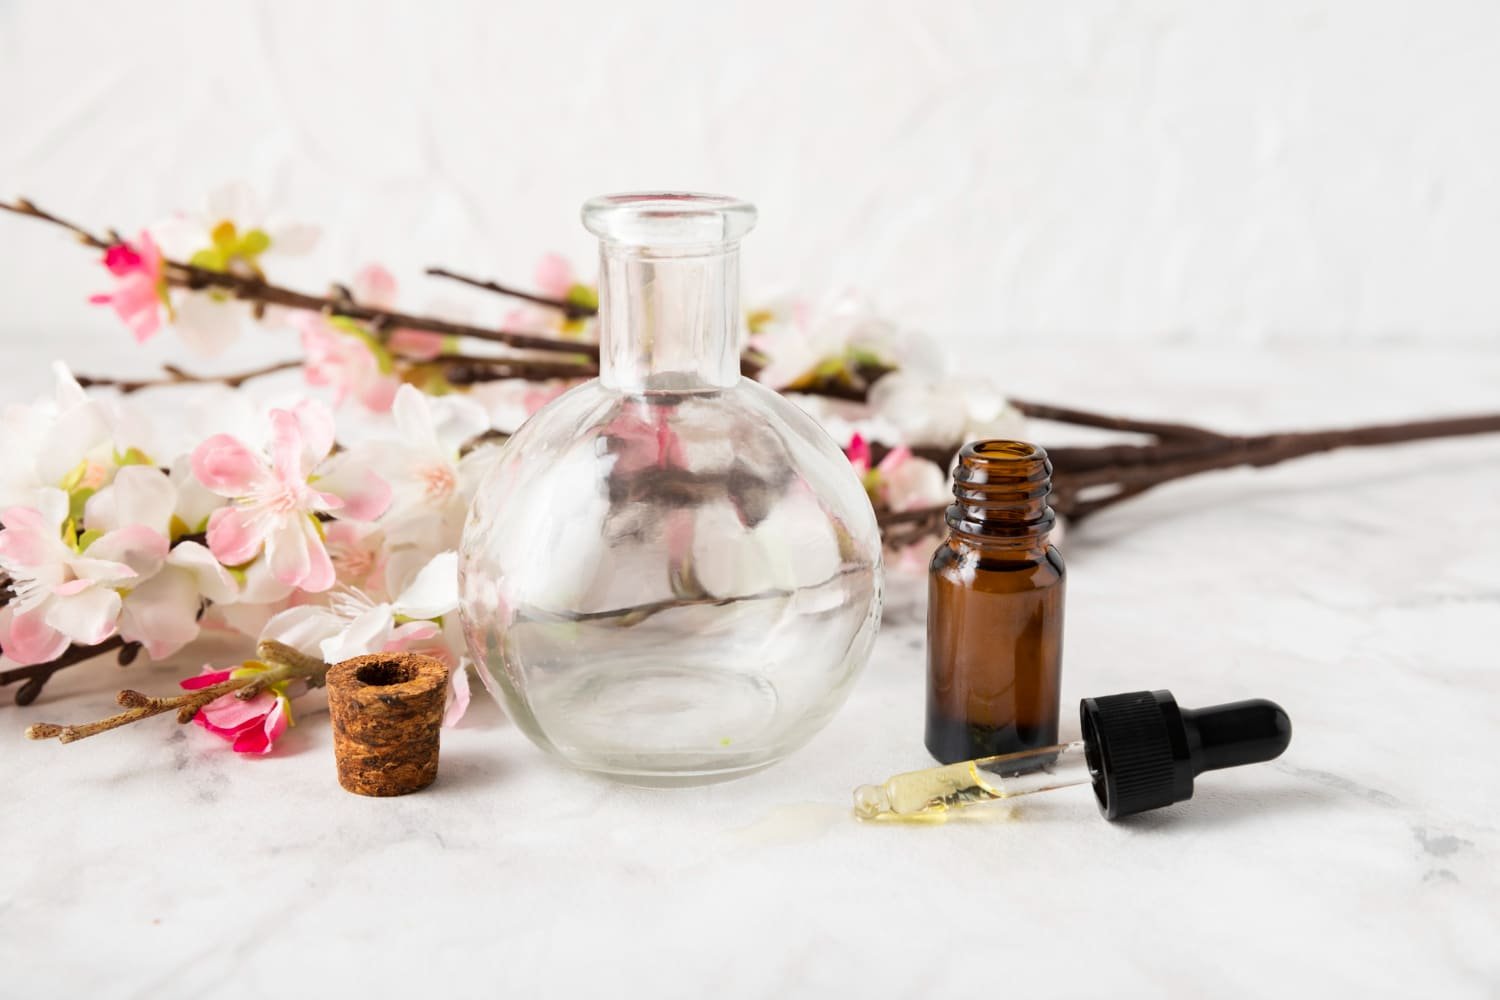 vitruvi: Essential Oils and Diffusers for a Balanced Home